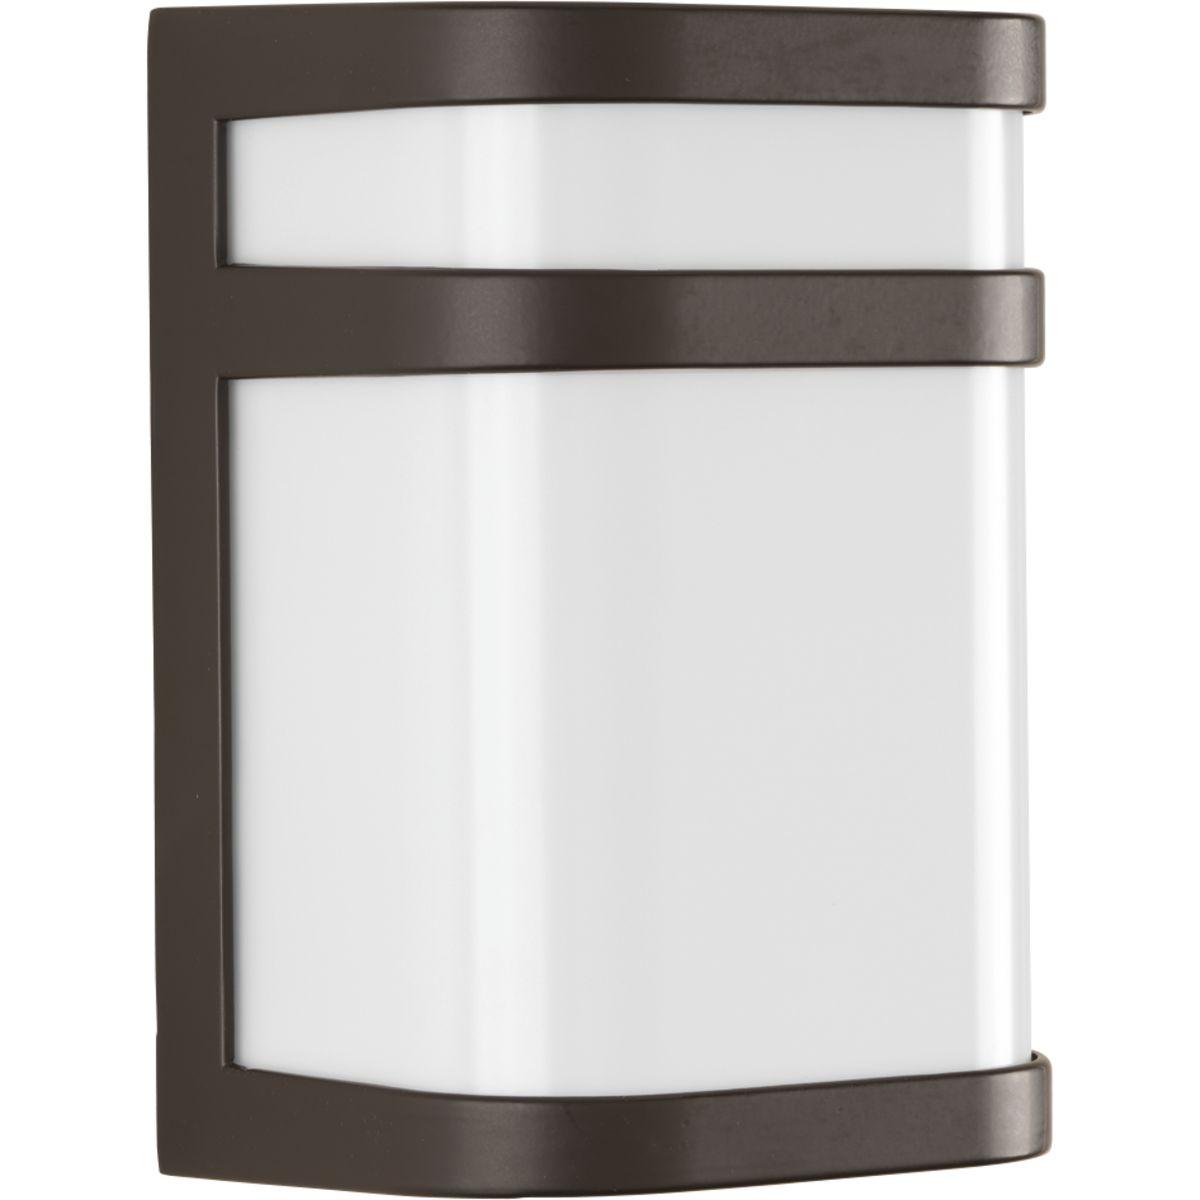 Hubbell P5800-12930K9 Clean lines are up front and center for these modern LED outdoor sconces. Valera features a die-cast aluminum frame and matte white, acrylic diffuser. Energy efficient LED source offers 3000K color temperature and 90+CRI output. Title 24 compliant. One-li